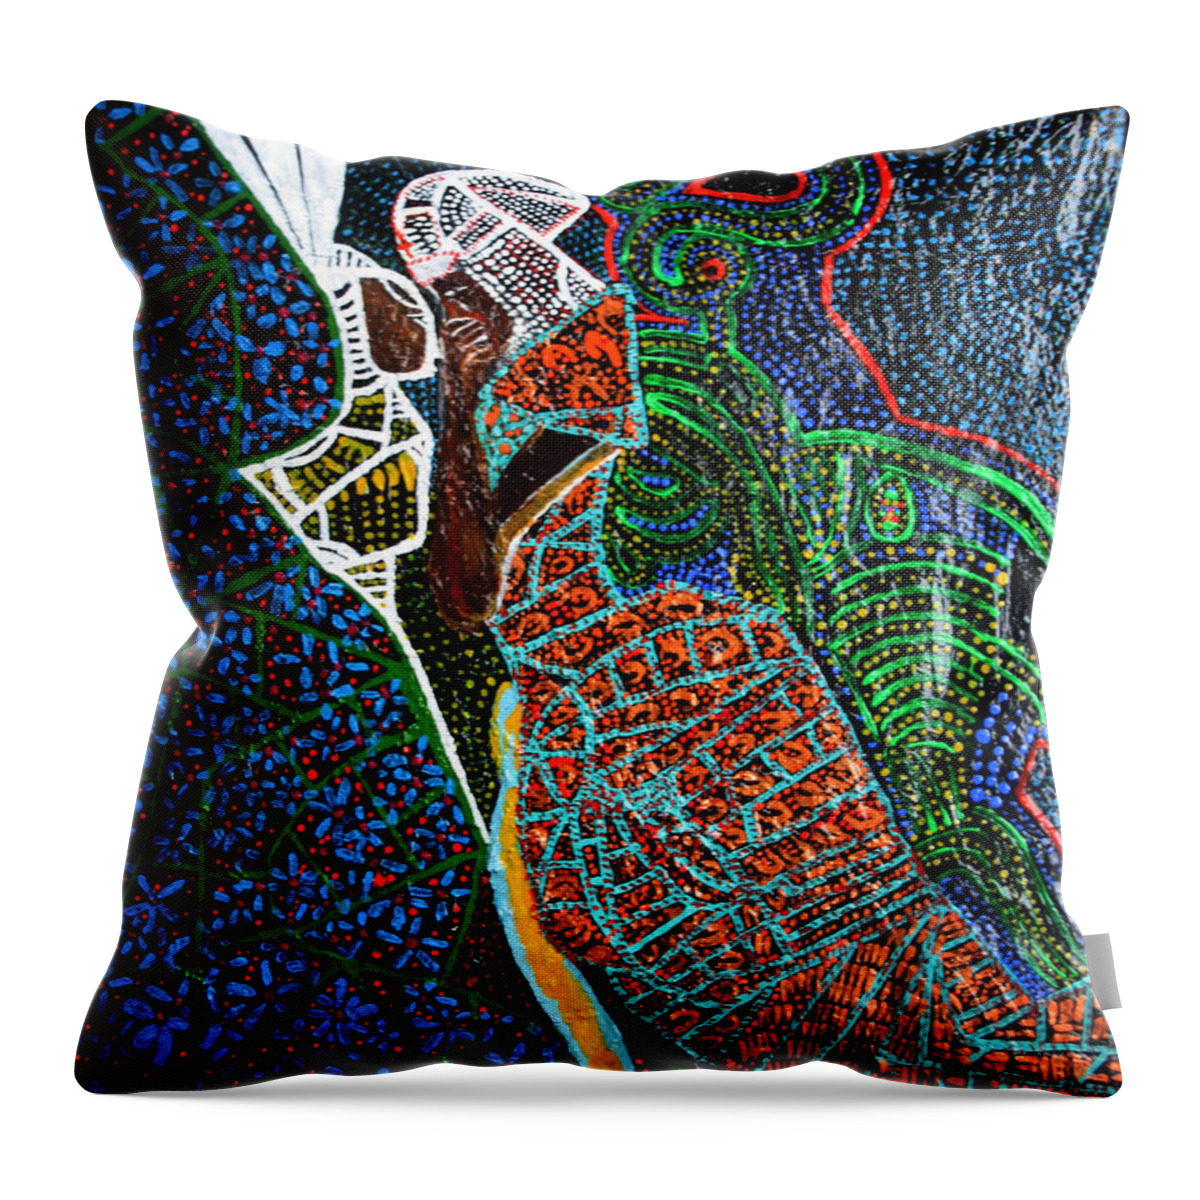 Jesus Throw Pillow featuring the painting The Annunciation by Gloria Ssali